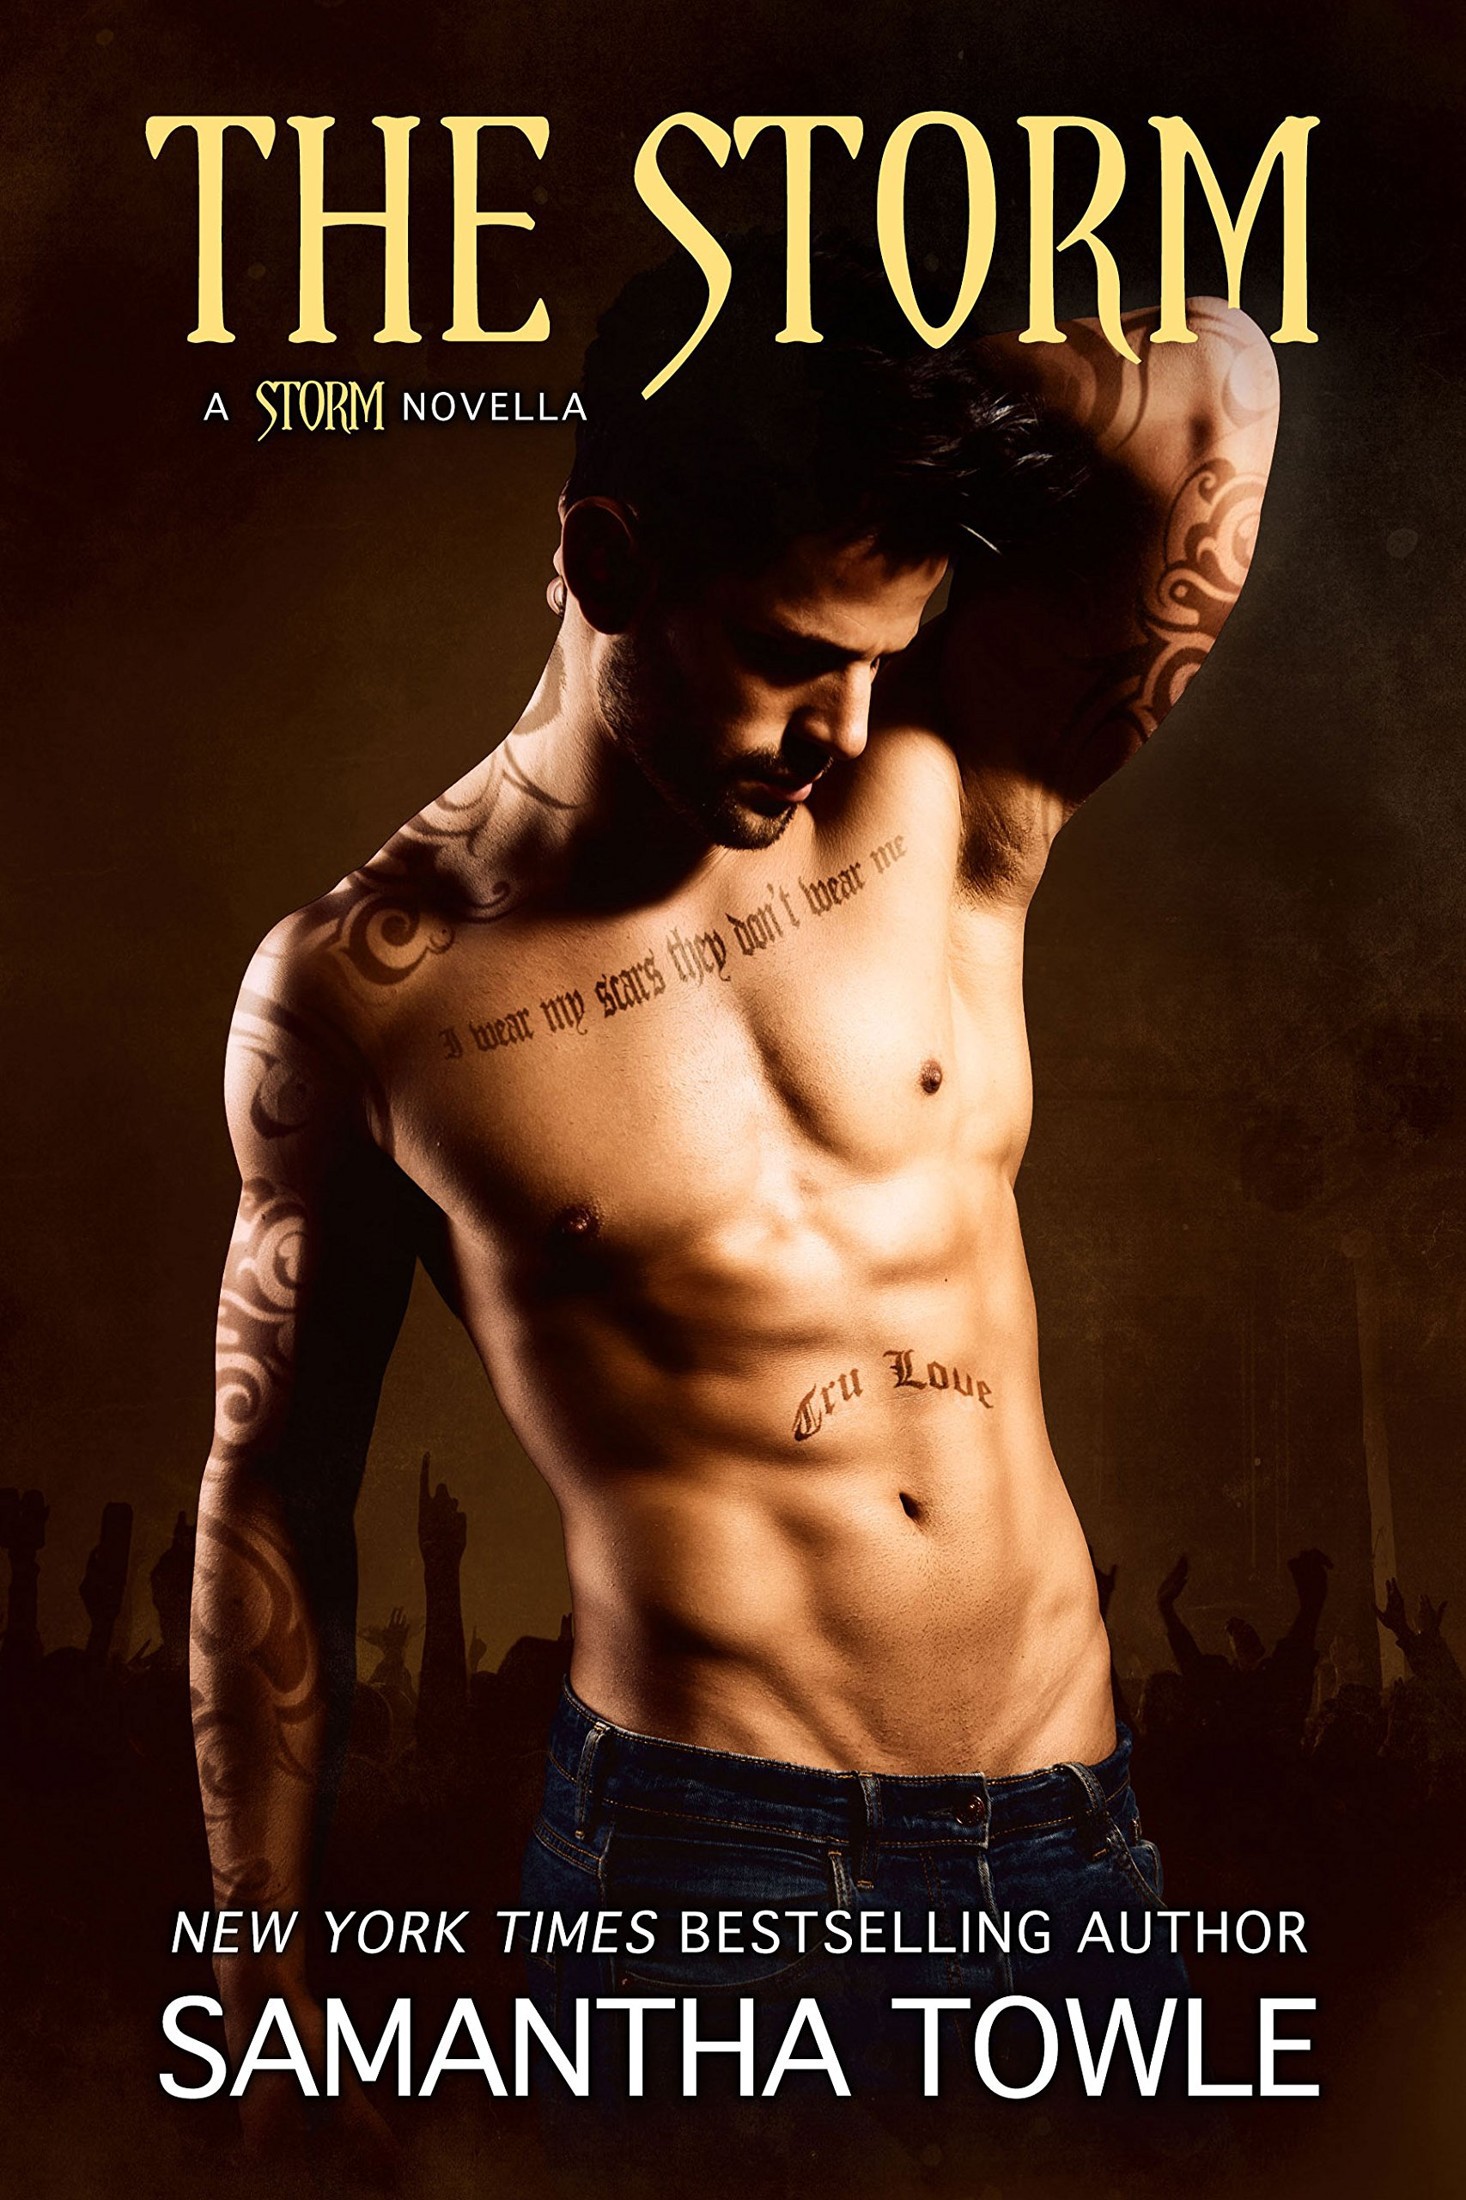 The Storm (The Storm #4) by Samantha Towle